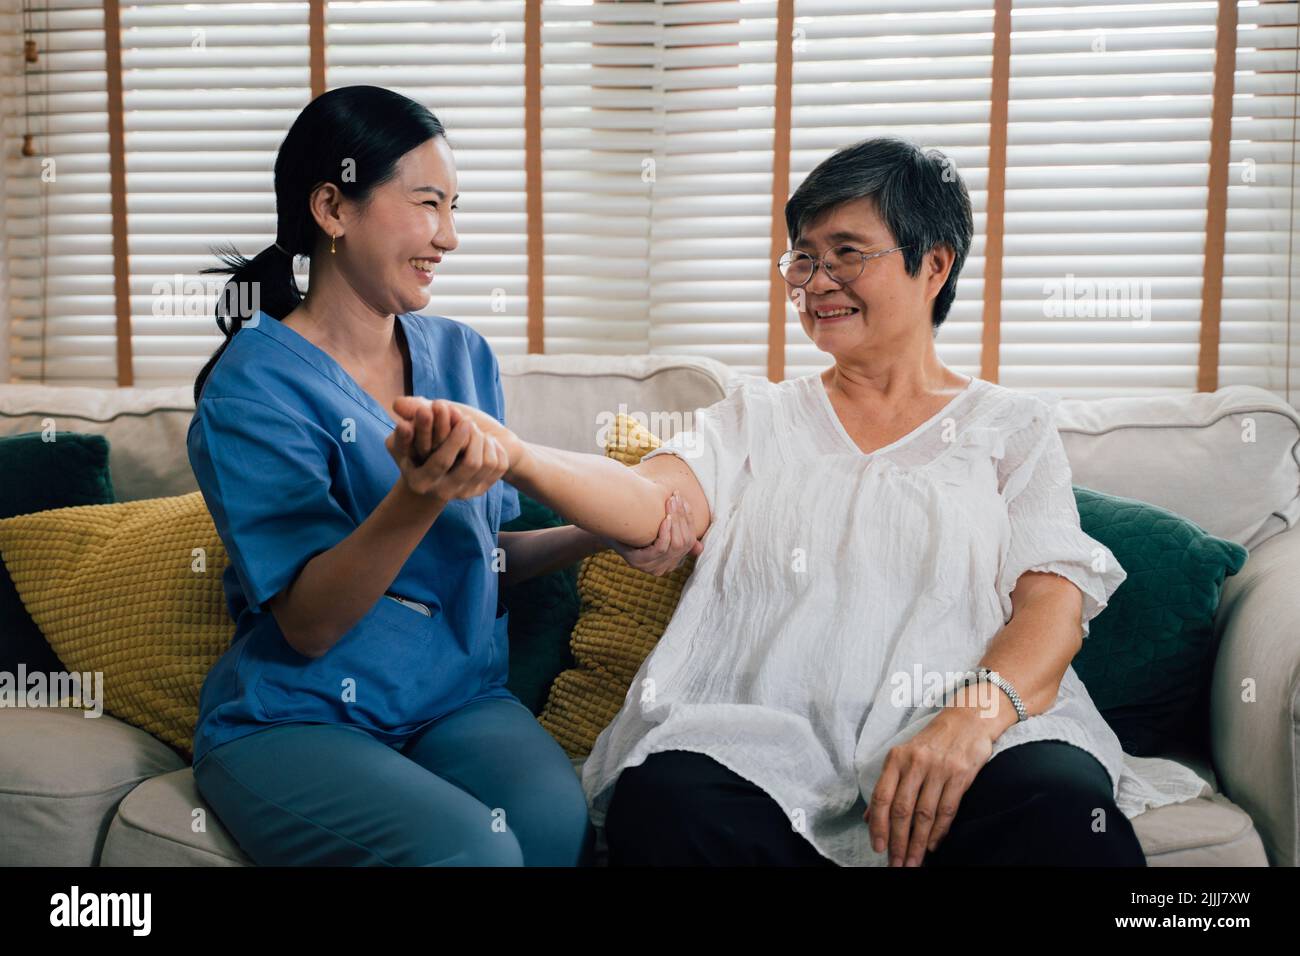 Delightful Female Caregiver In Blue Uniform Smiling And Stretching Arm Of Elderly Asian Woman